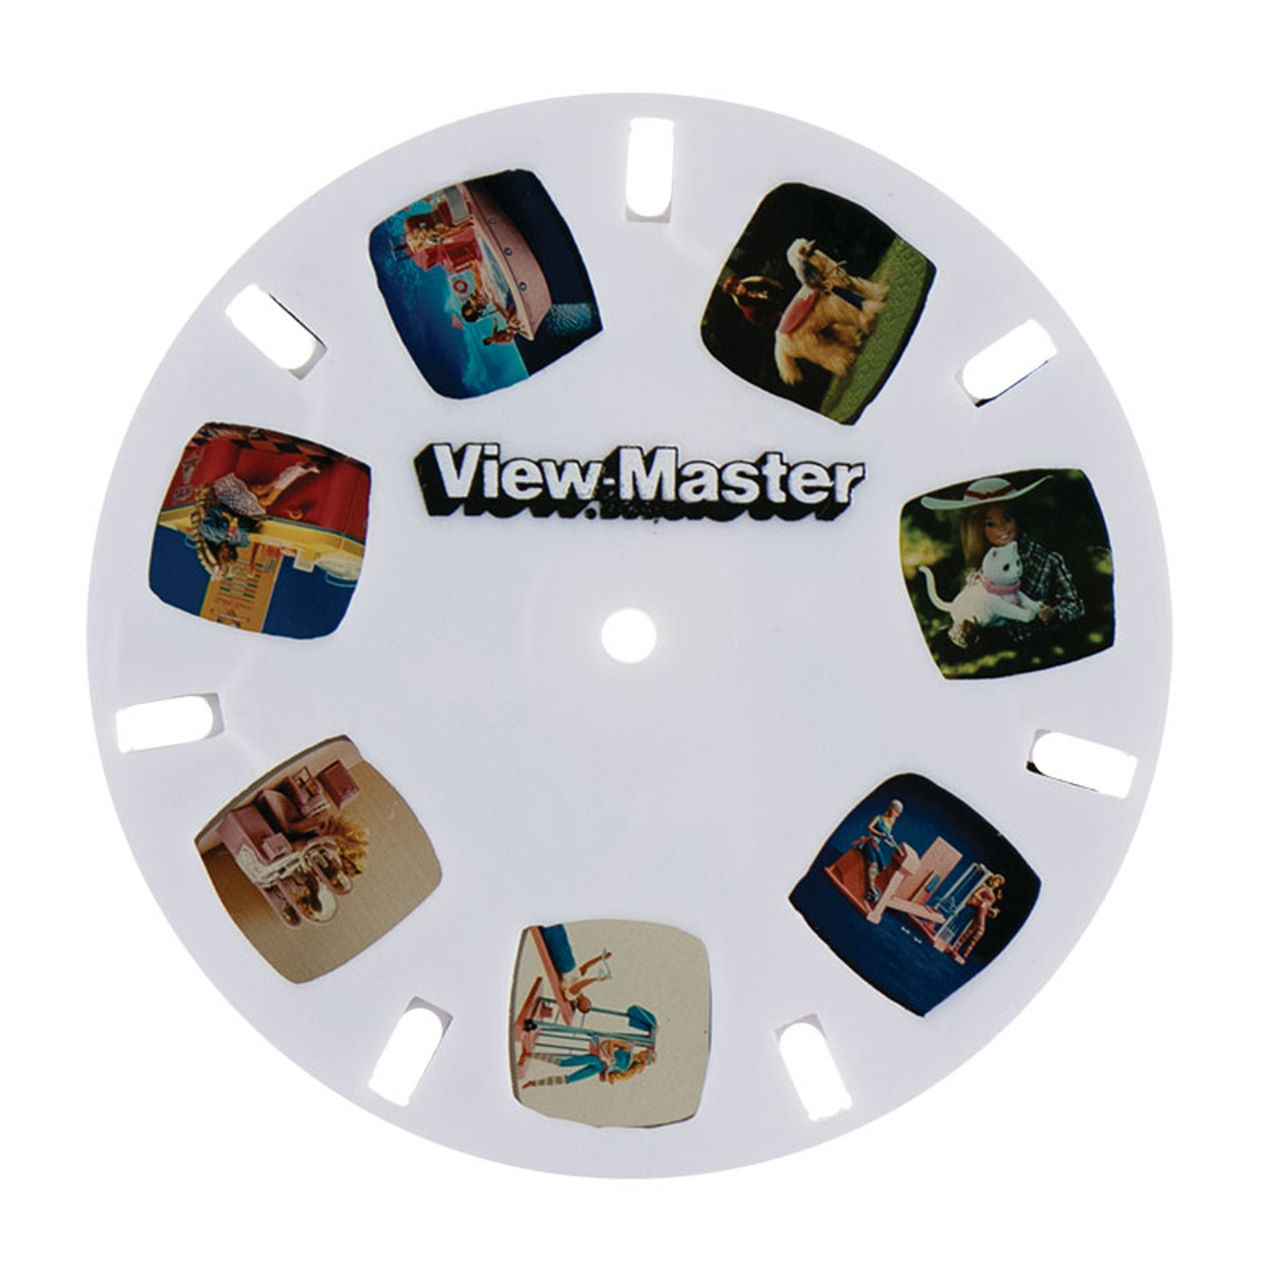 https://cdn11.bigcommerce.com/s-pqt7n8/images/stencil/1280x1280/products/12867/40222/super-impulse-worlds-smallest-view-master-barbie6__19404.1698855031.jpg?c=2?imbypass=on